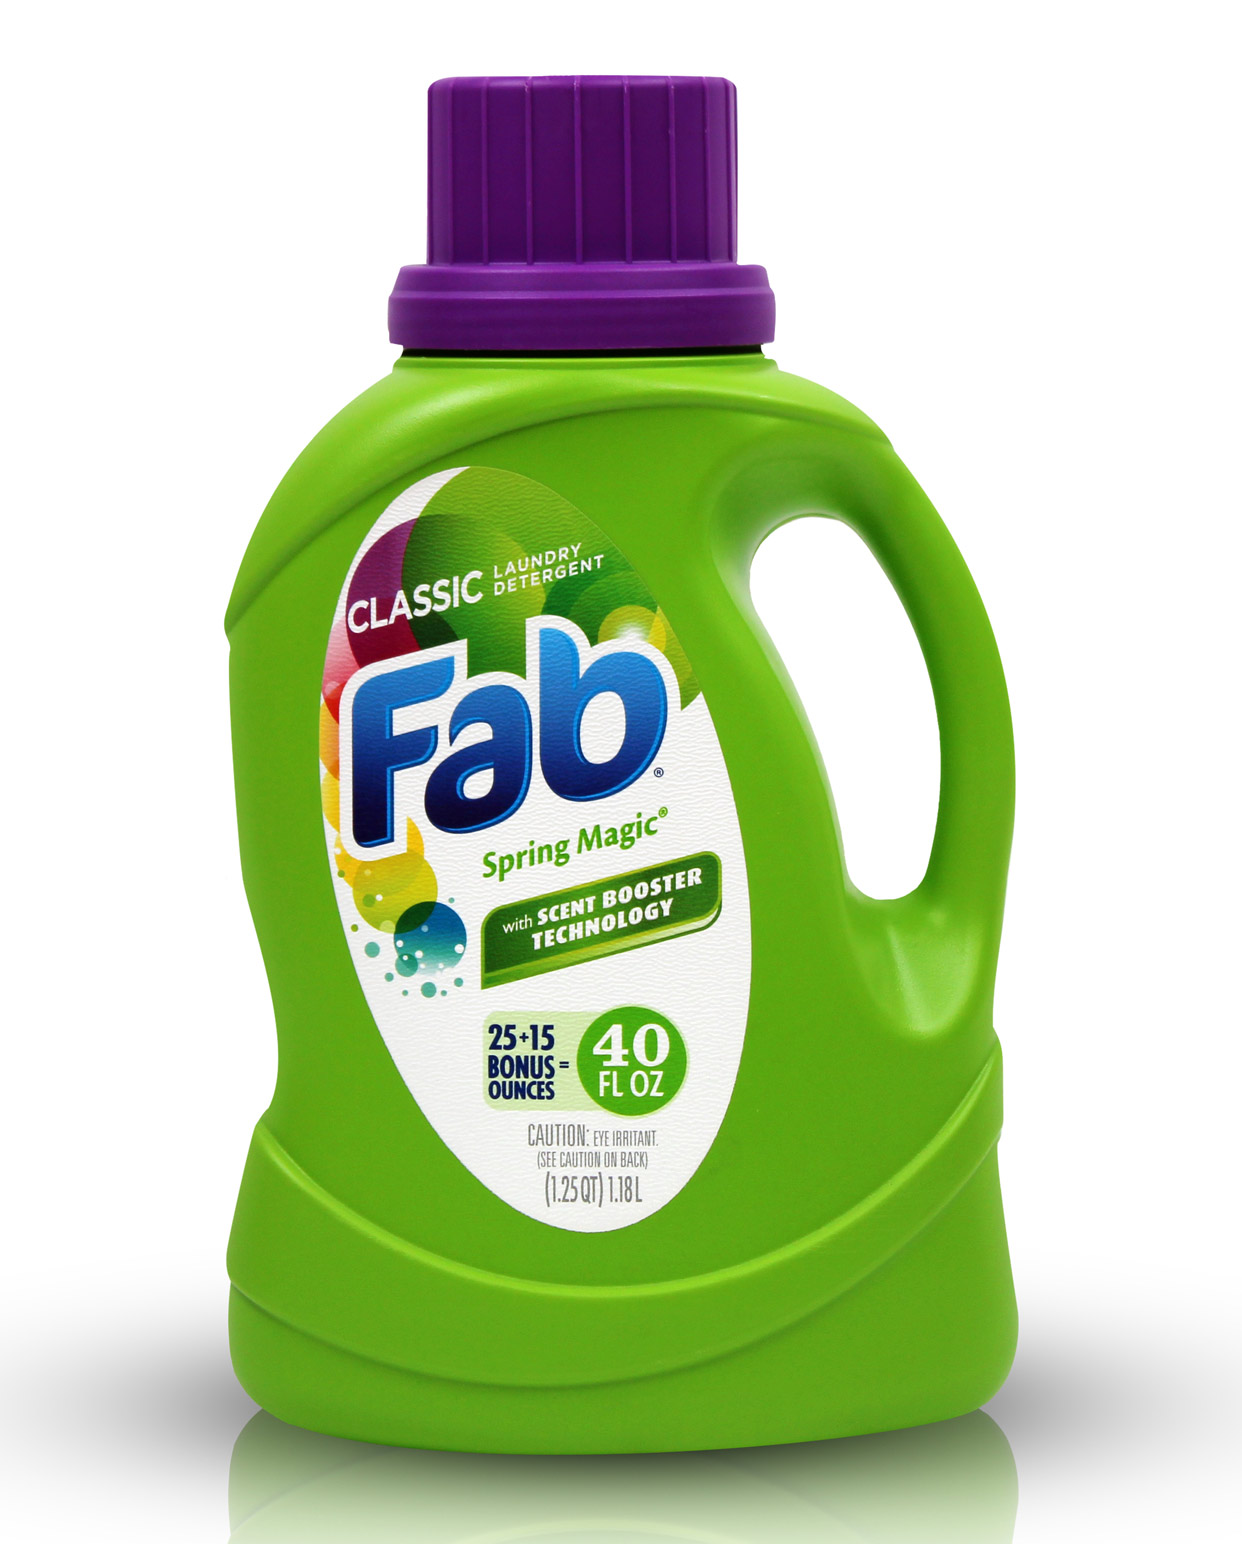 40oz bottle of FAB Scented Laundry Detergent Spring Freash